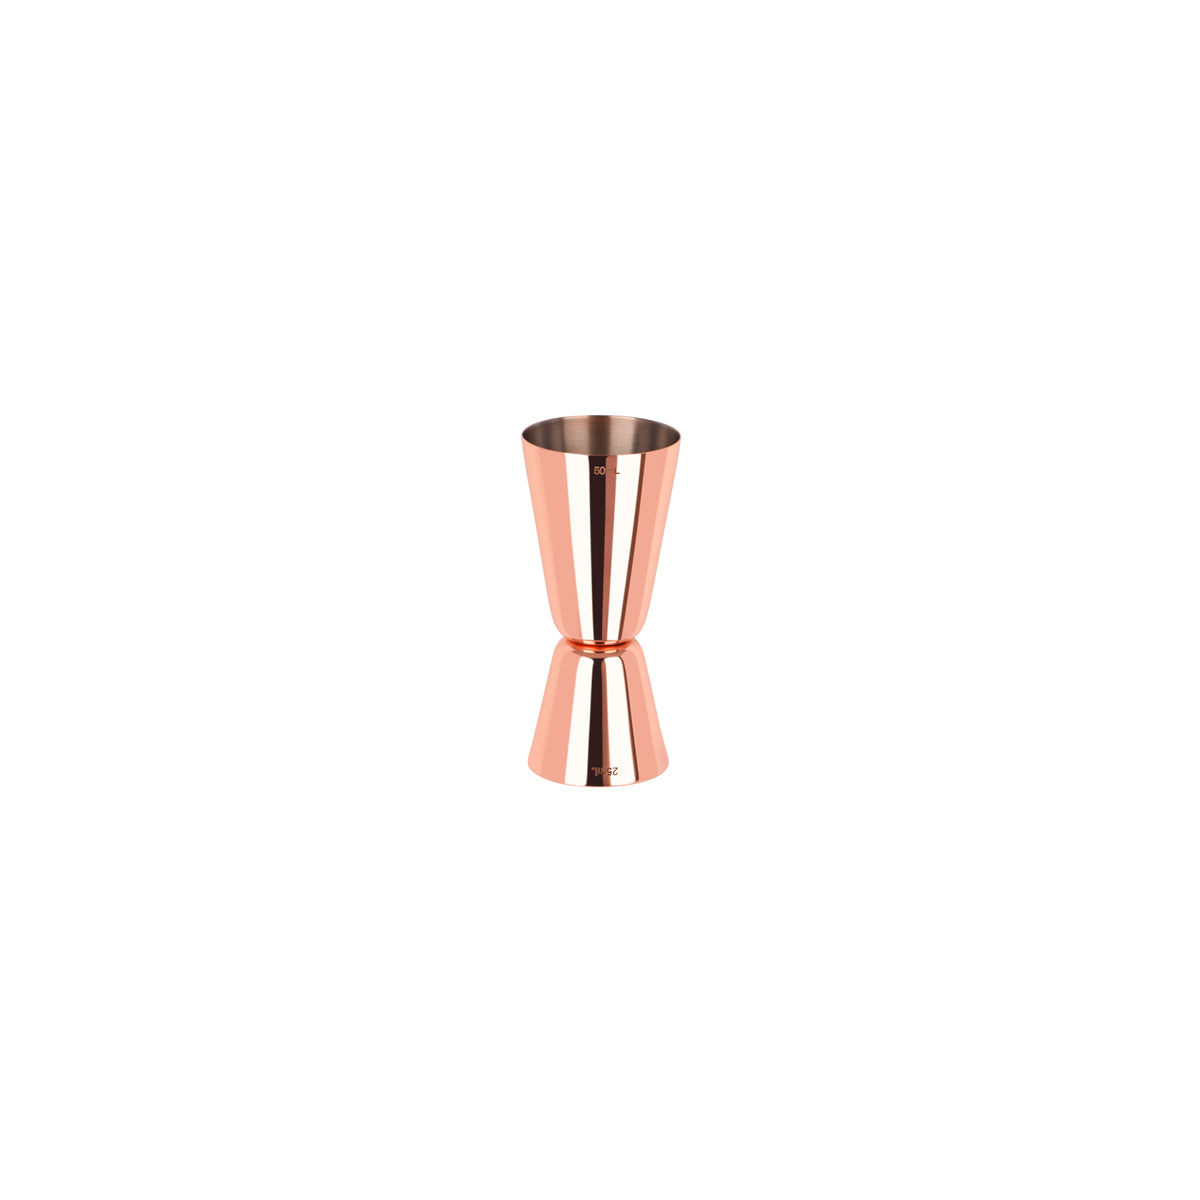 Classic Style Jigger - Rose Gold, 20/50Ml from Zanzi. Packed in a gift box and sold in boxes of 1. Hospitality quality at wholesale price with The Flying Fork! 